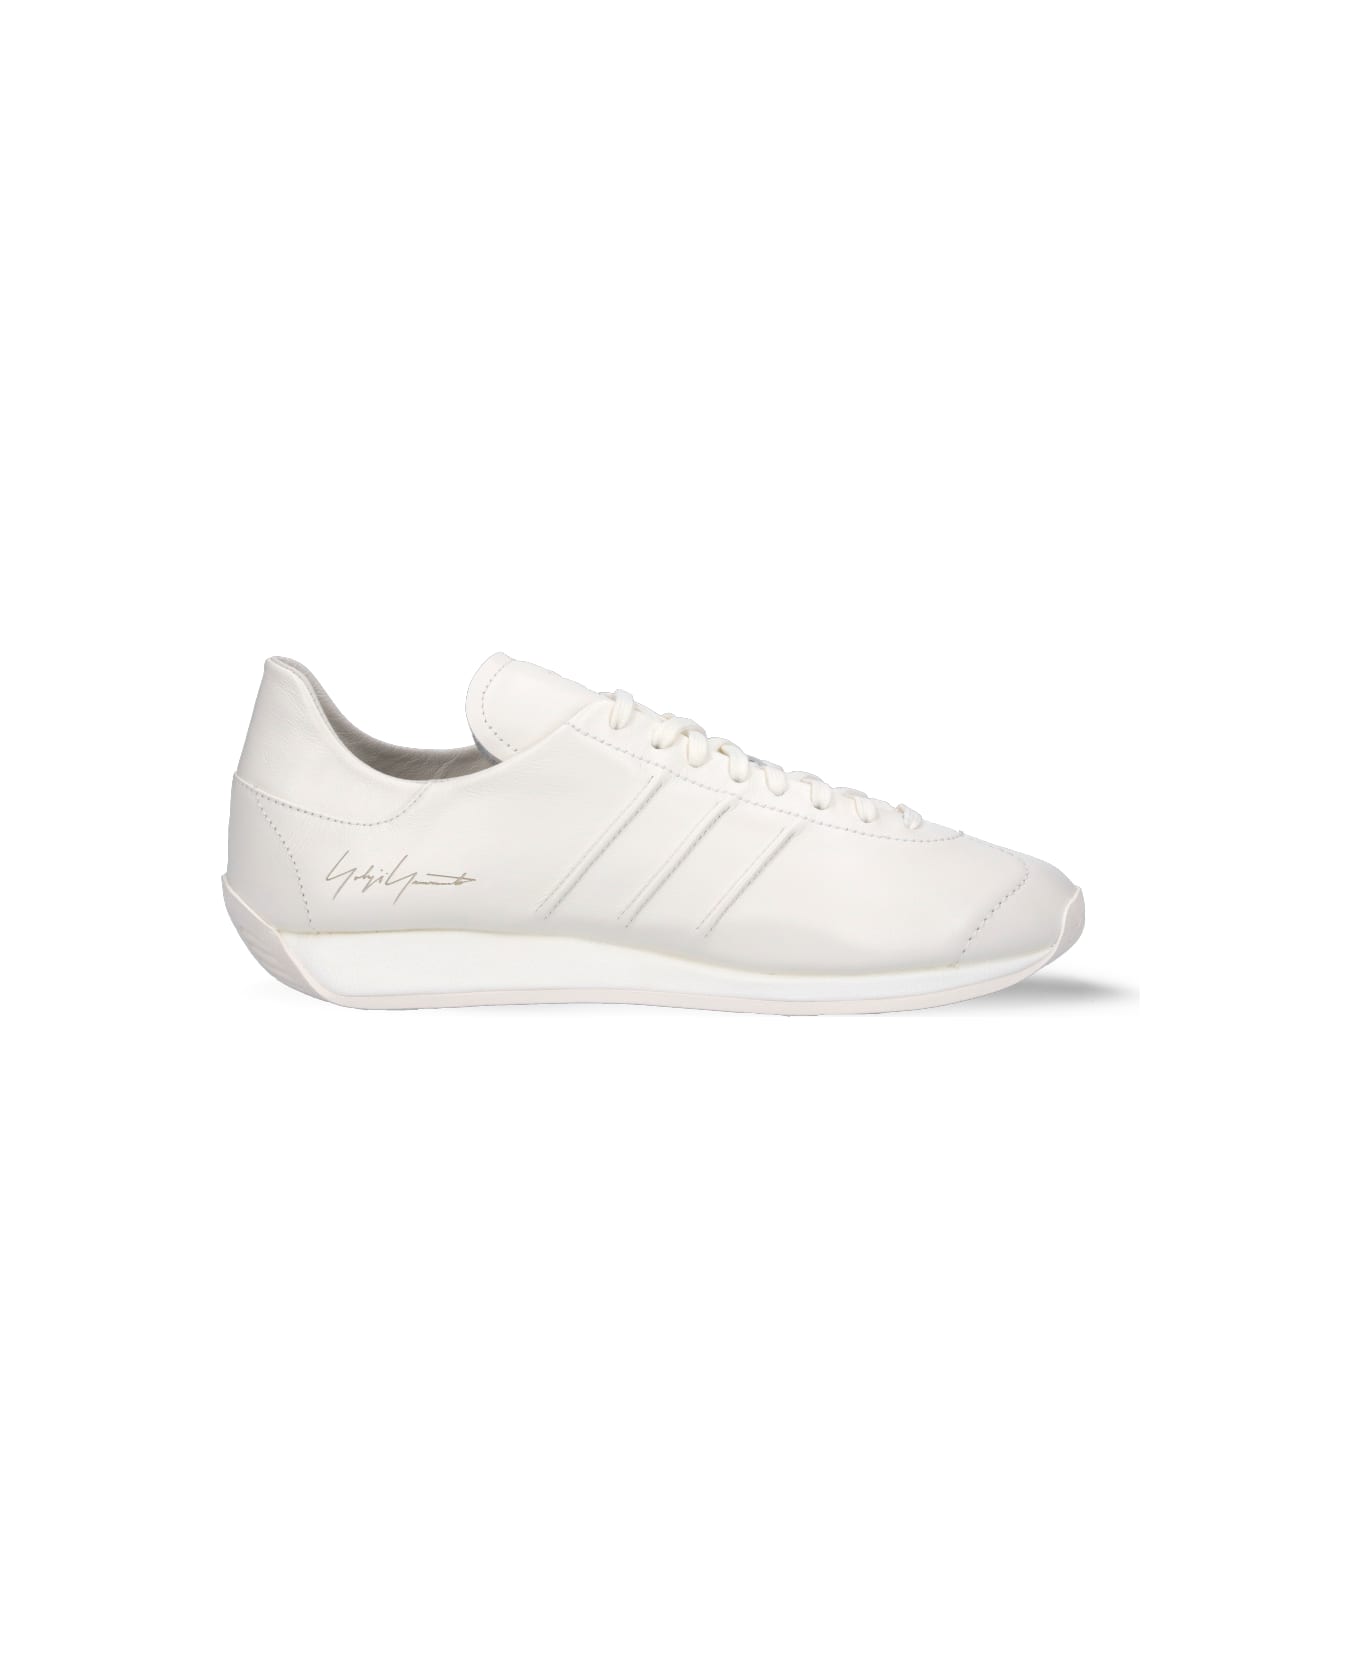 Y-3 "country" Sneakers - White